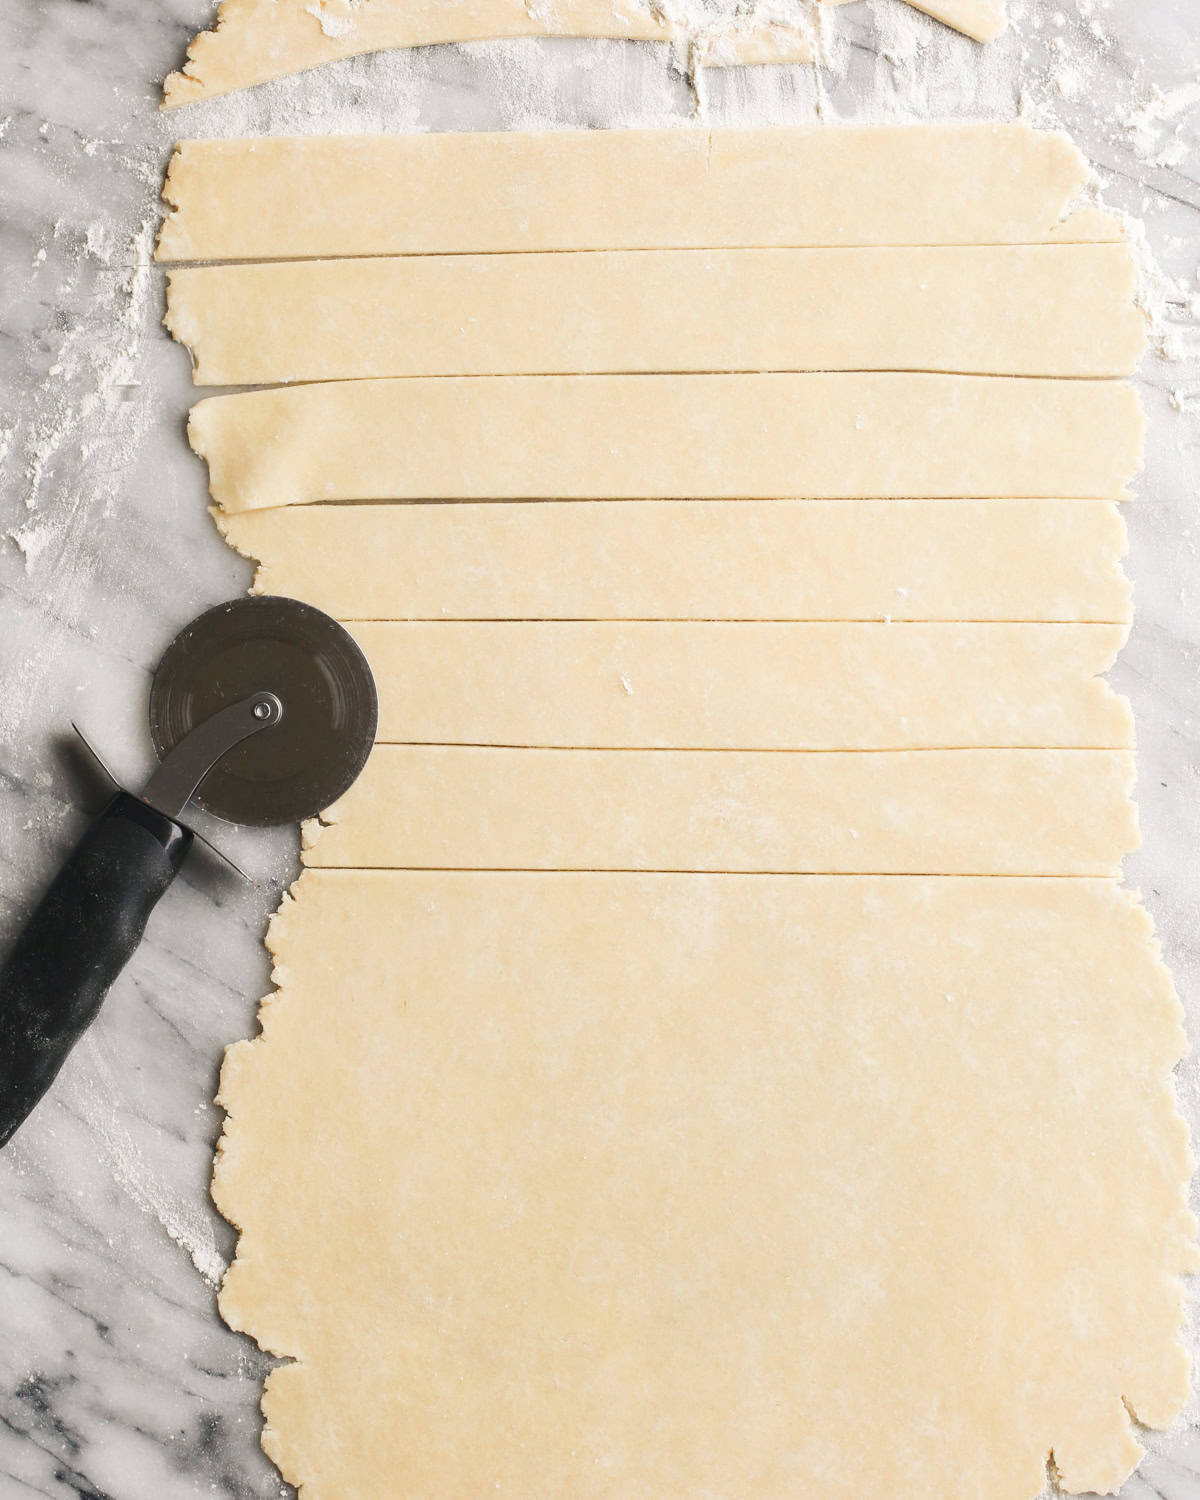 butter pie crust rolled out and being cut to make a lattice top